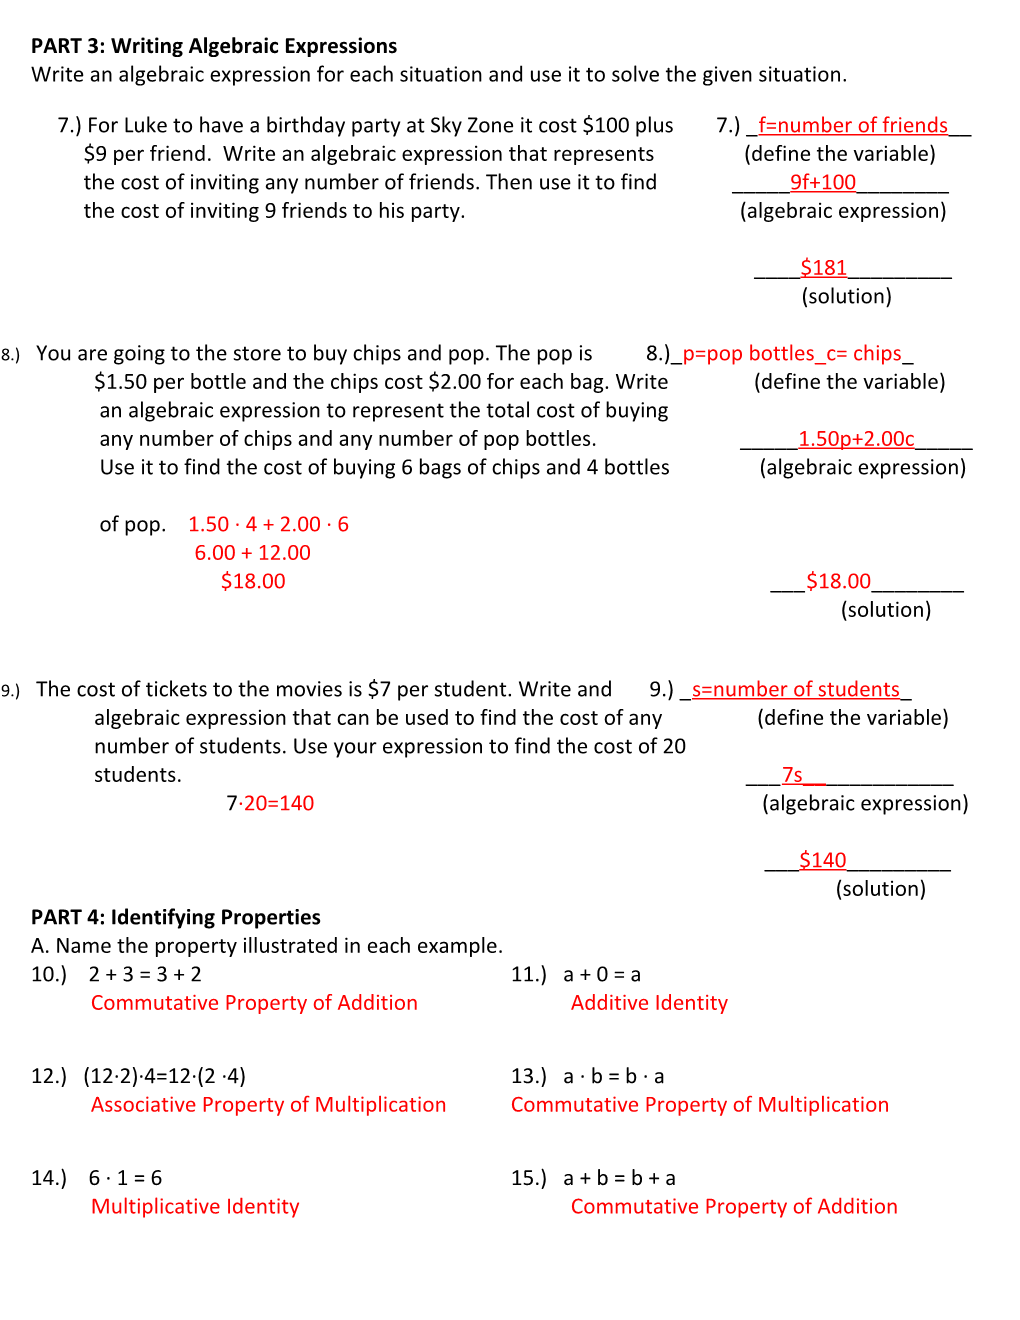 Copy of Algebraic Expressions Study Guide for Math 7